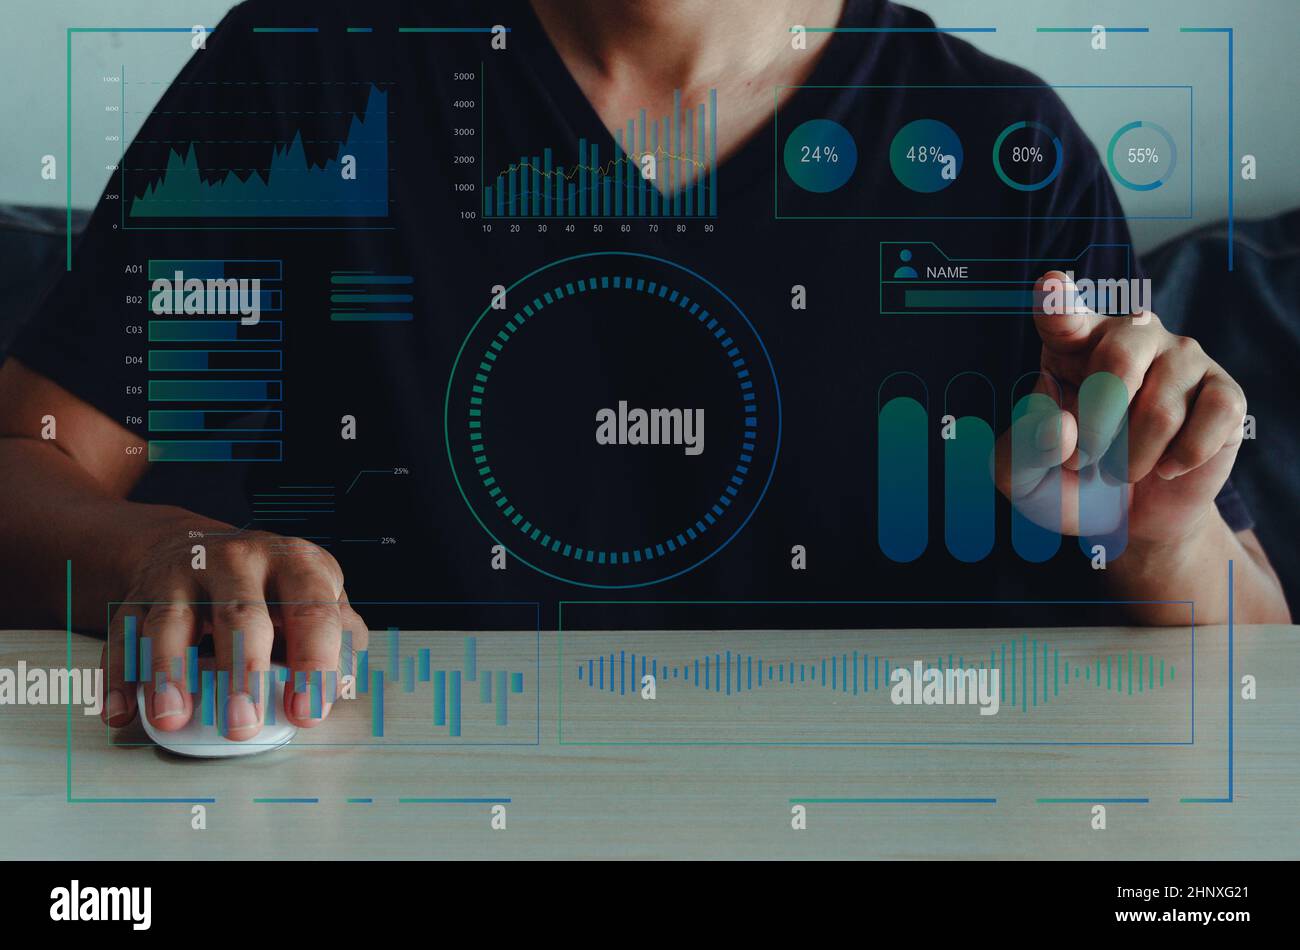 Digital big data and virtual screen technology concept WEB 3.0.Man using mouse and touch virtual screen. Stock Photo